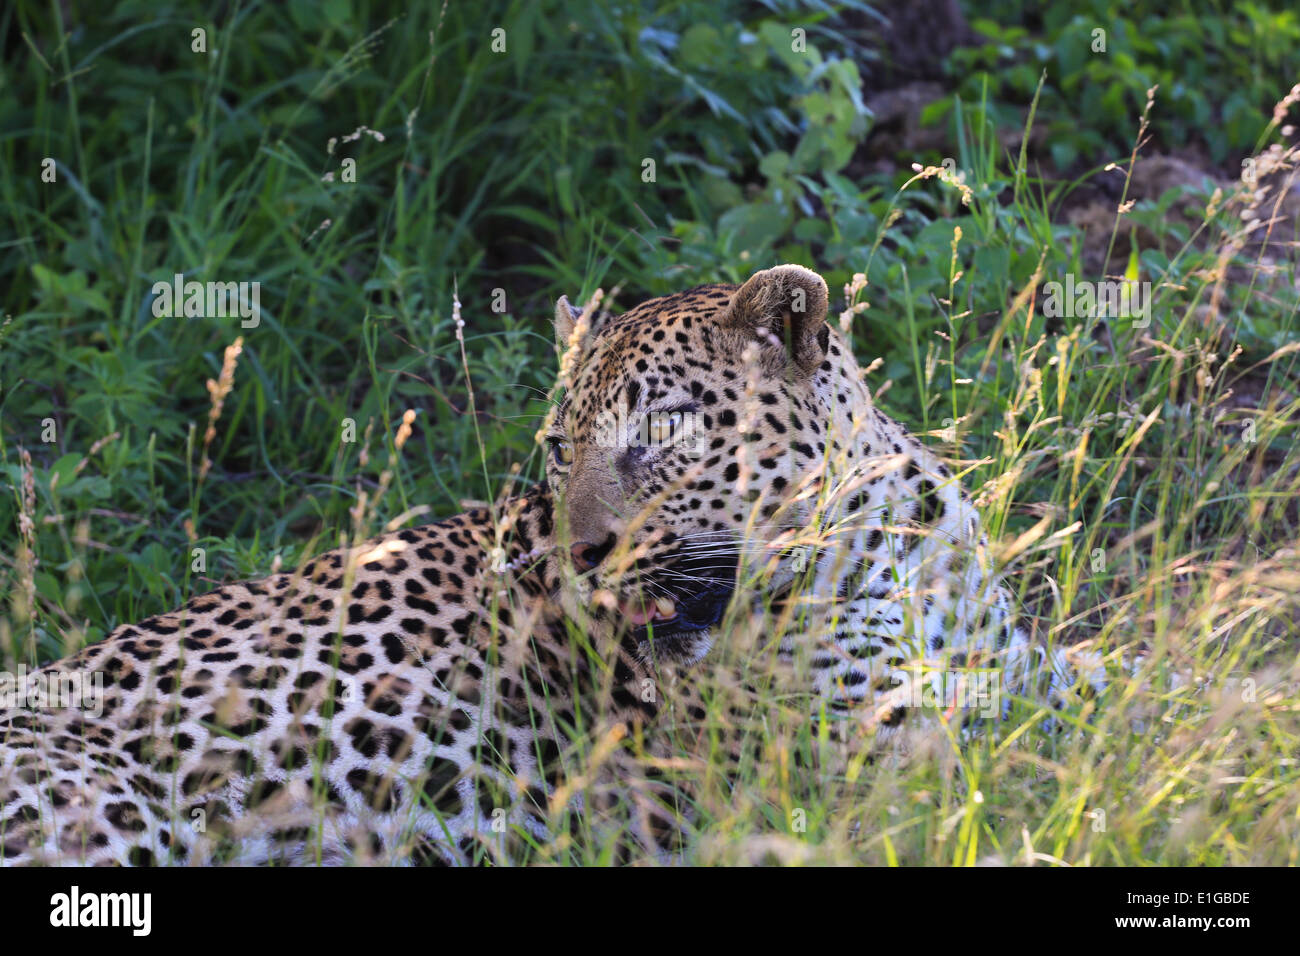 A leopard, one of the big 5 animals, rests in the shade at the Sabi Sands Game Reserve, Kruger National Park, South Africa. Stock Photo